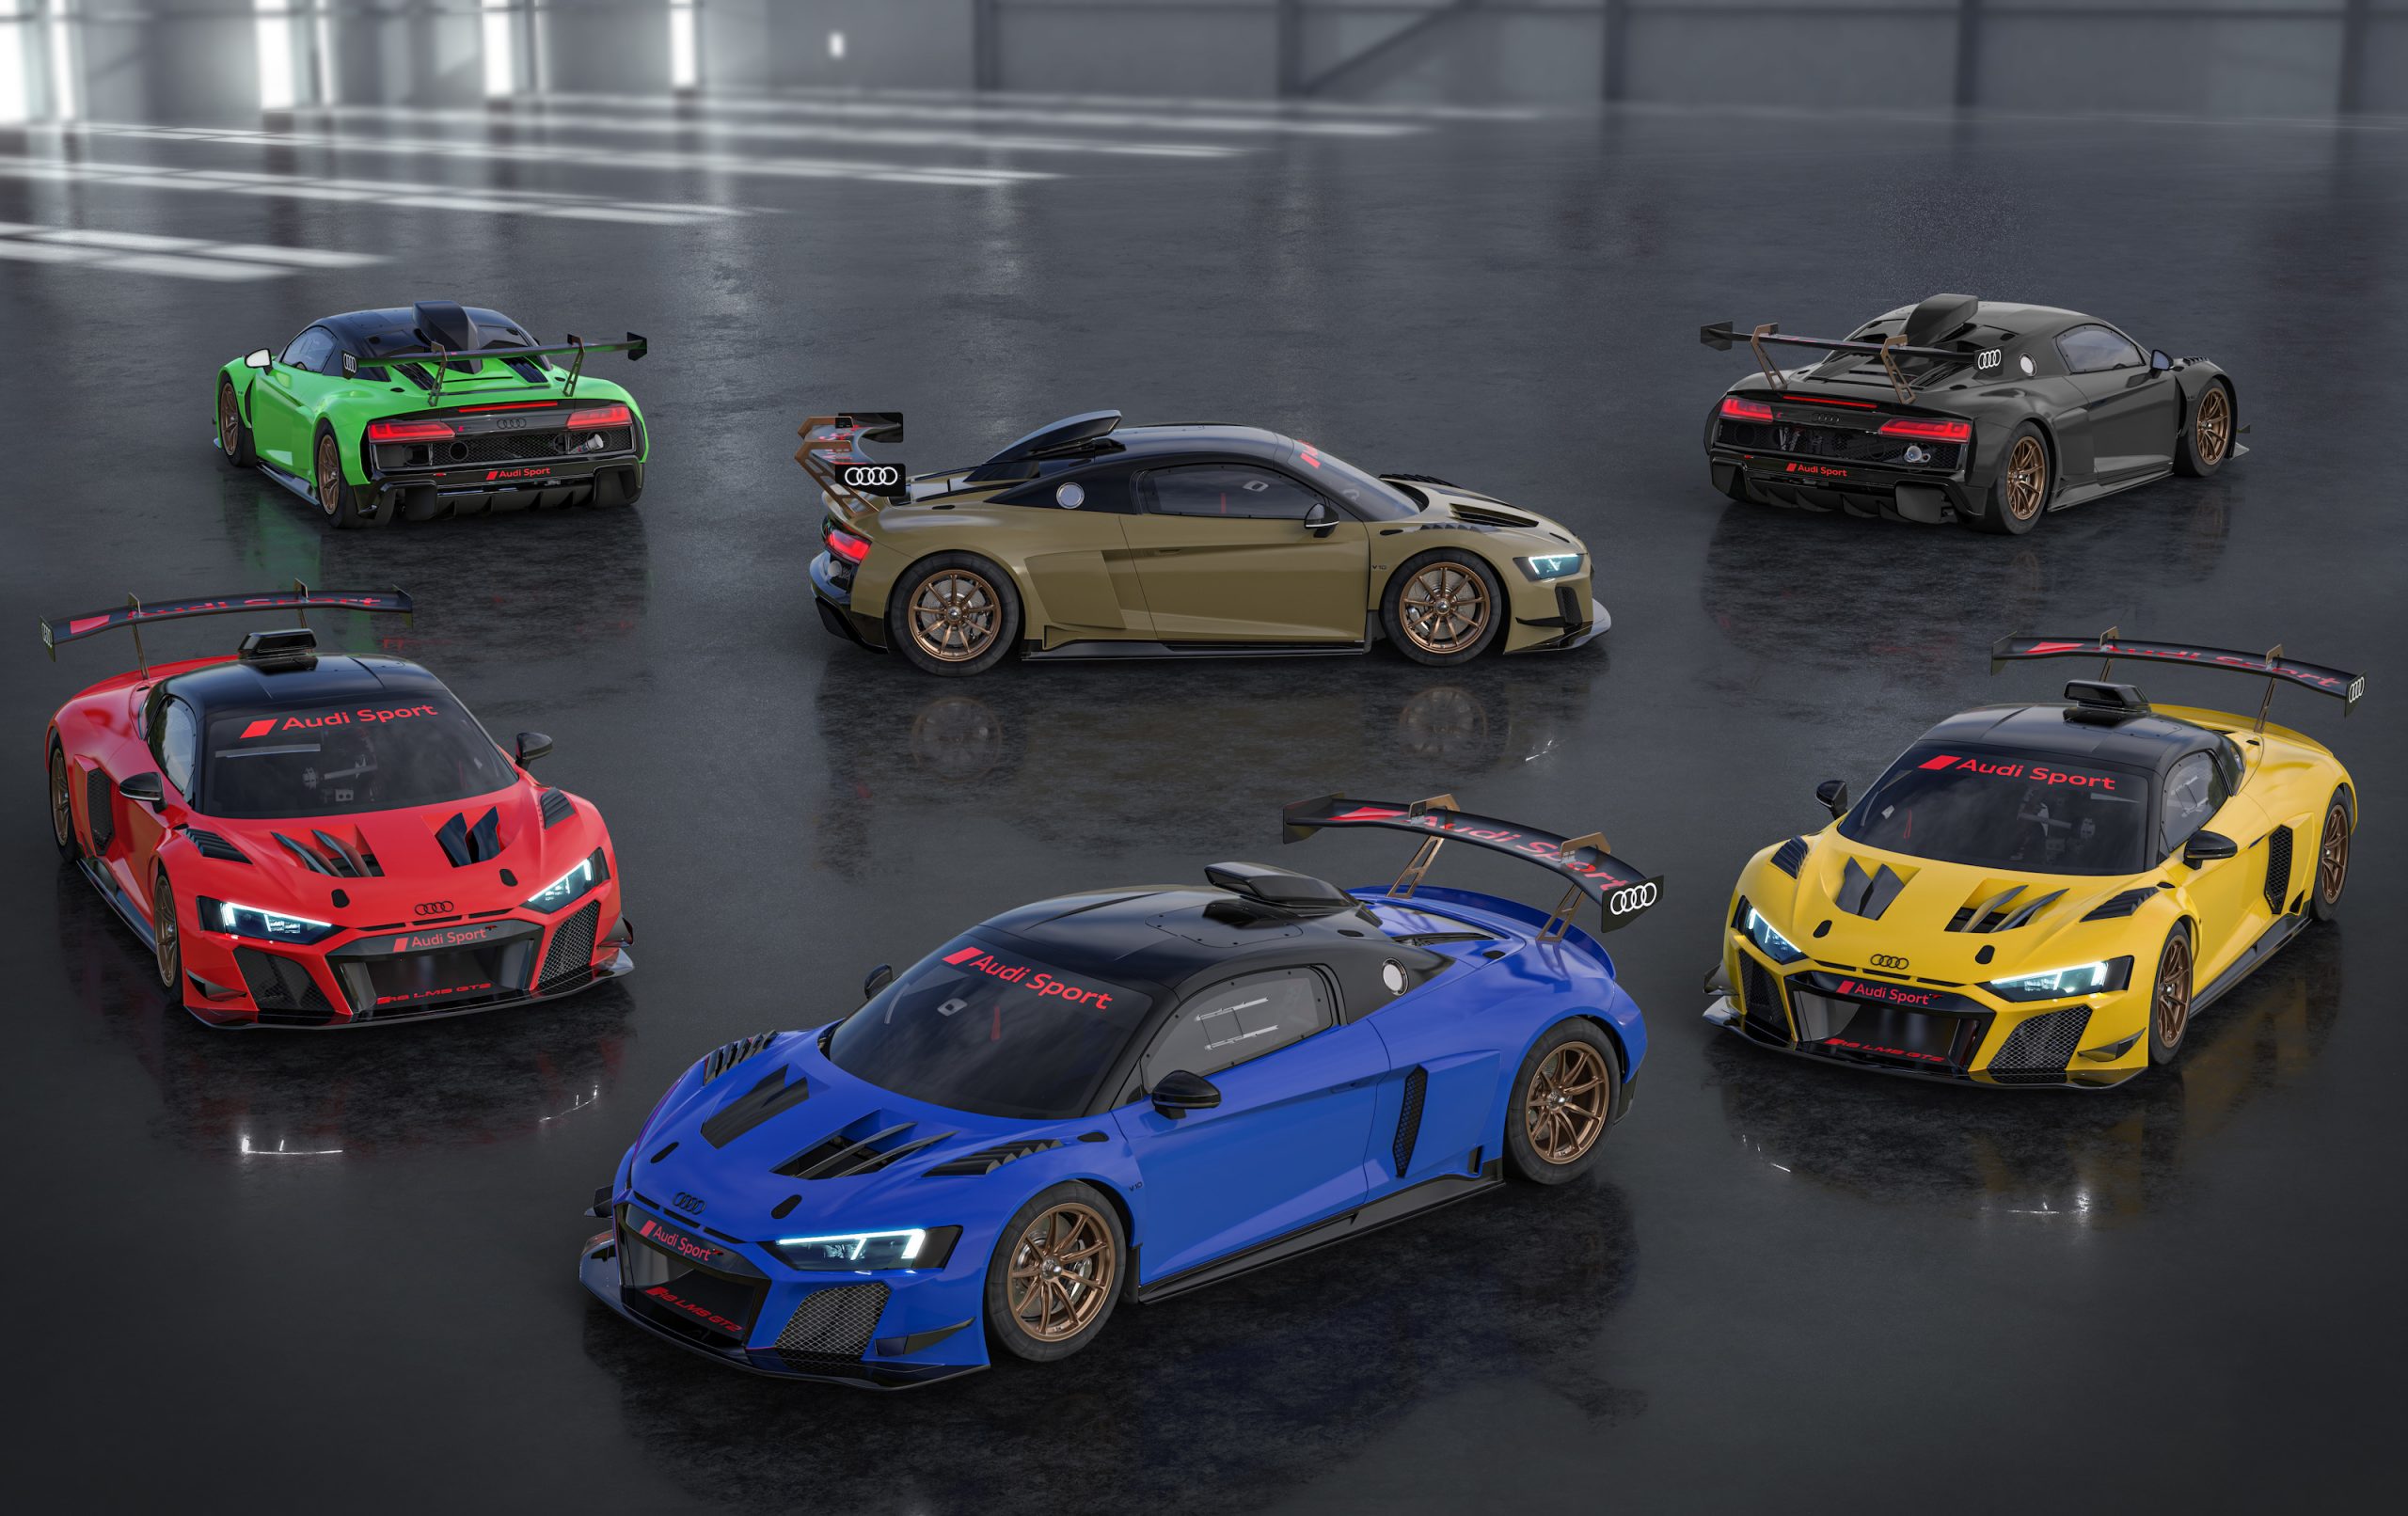 The 6 car 2021 Audi R8 LMS GT2 Color Edition line up in blue, yellow, red, balck, lime green and olive green